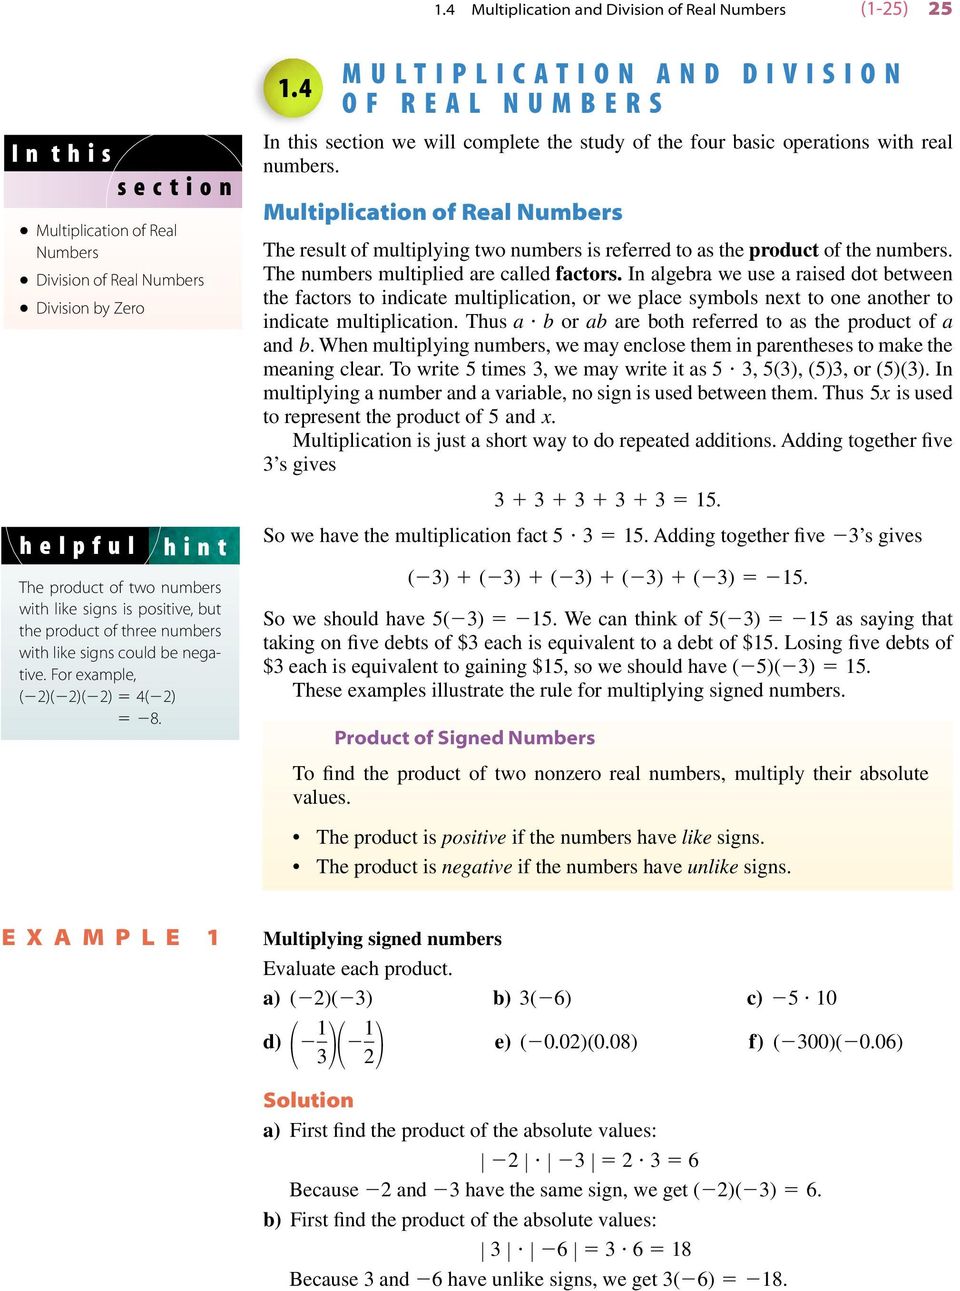 4 MULTIPLICATION AND DIVISION OF REAL NUMBERS In this section we will complete the study of the four basic operations with real numbers.